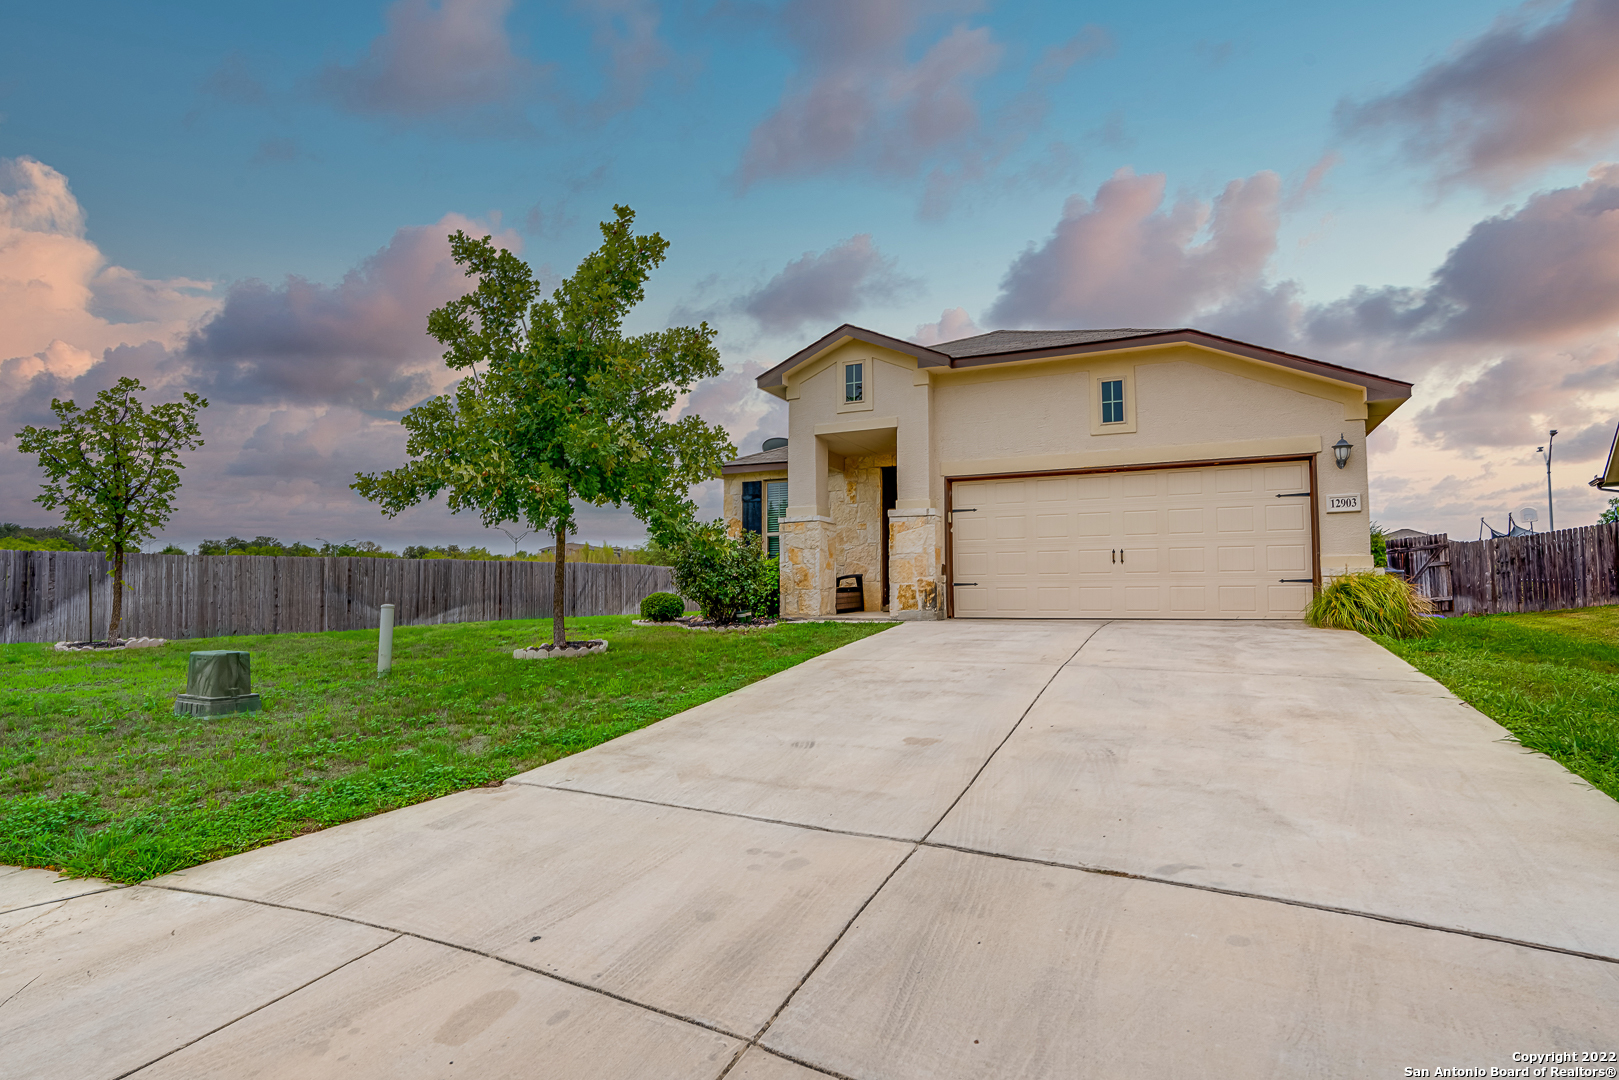 Don't miss out on this awesome single story home in gated Steubing Farm community!  Built in 2015 by Meritage Homes this one features split floor plan with three bedrooms and an office that could also be used a fourth bedroom. Very open and spacious - great for entertaining. Neutral tones through out. Granite countertops in kitchen, gas cooking, stainless steel appliances, island, 42" inch cabinets with 2" crown molding, ample cabinet storage, walk in pantry and closed off laundry room. Spacious owners retreat and en suite bathroom. Separate walk in shower & tub plus a walk in closet. Fantastic location with easy access to Hausman Rd, IH-10, Loop 1604. Close to the Shops at La Cantera, The Rim, Six Flags, Tons of Restaurants, UTSA, Costco, La Cantera Golf Course, Medical Center and so much more!